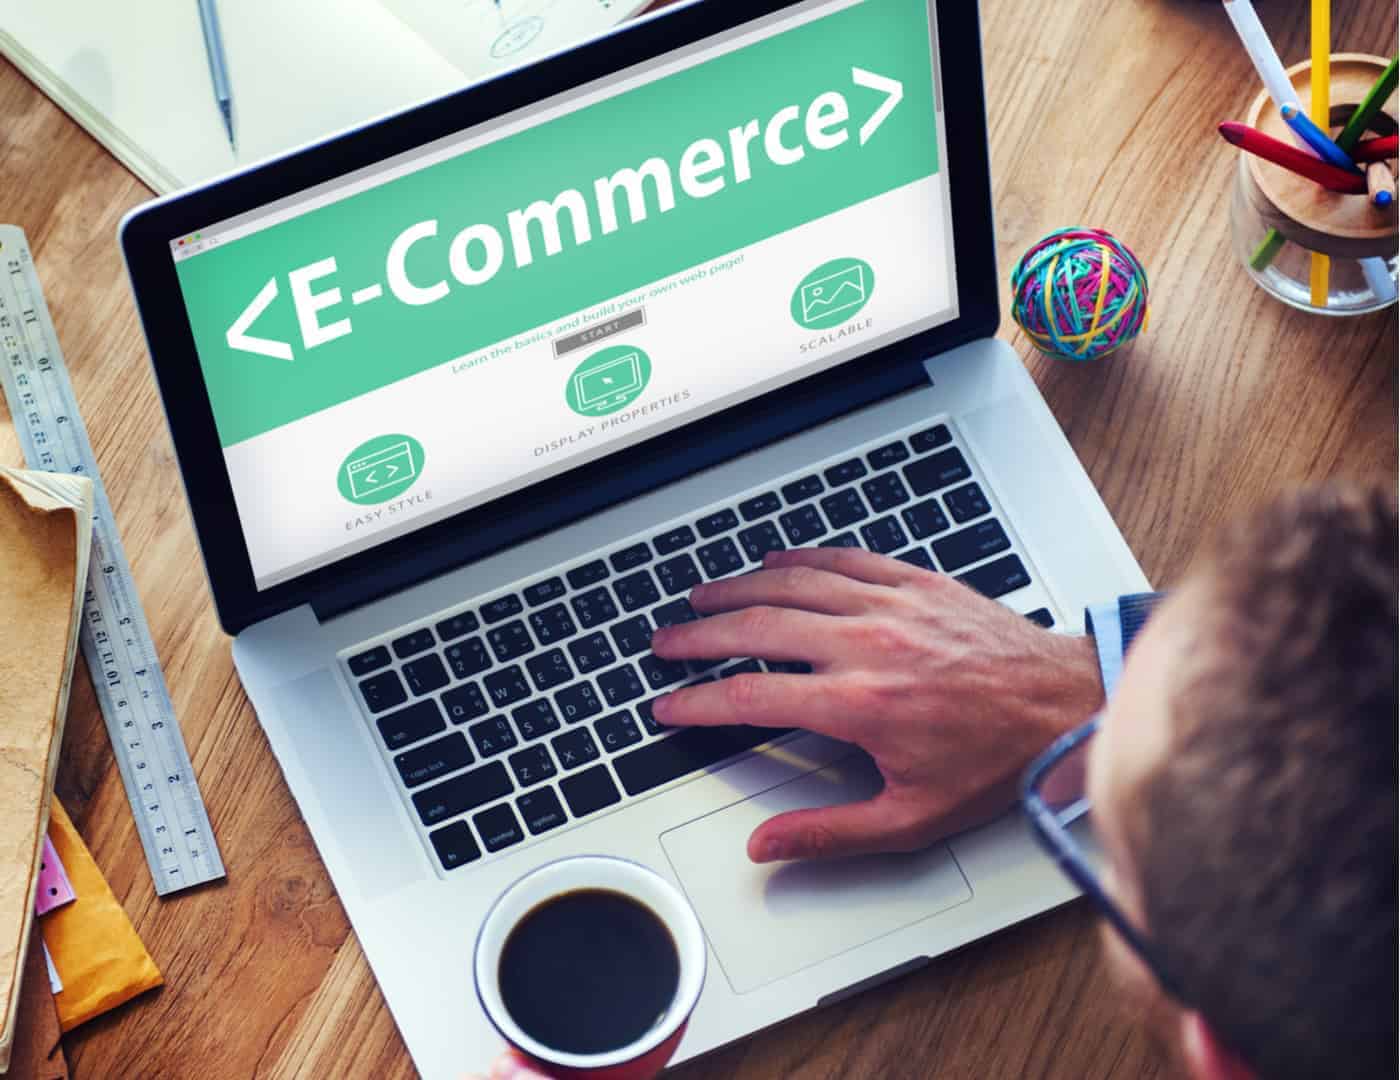 What are the Different Types of eCommerce Available?